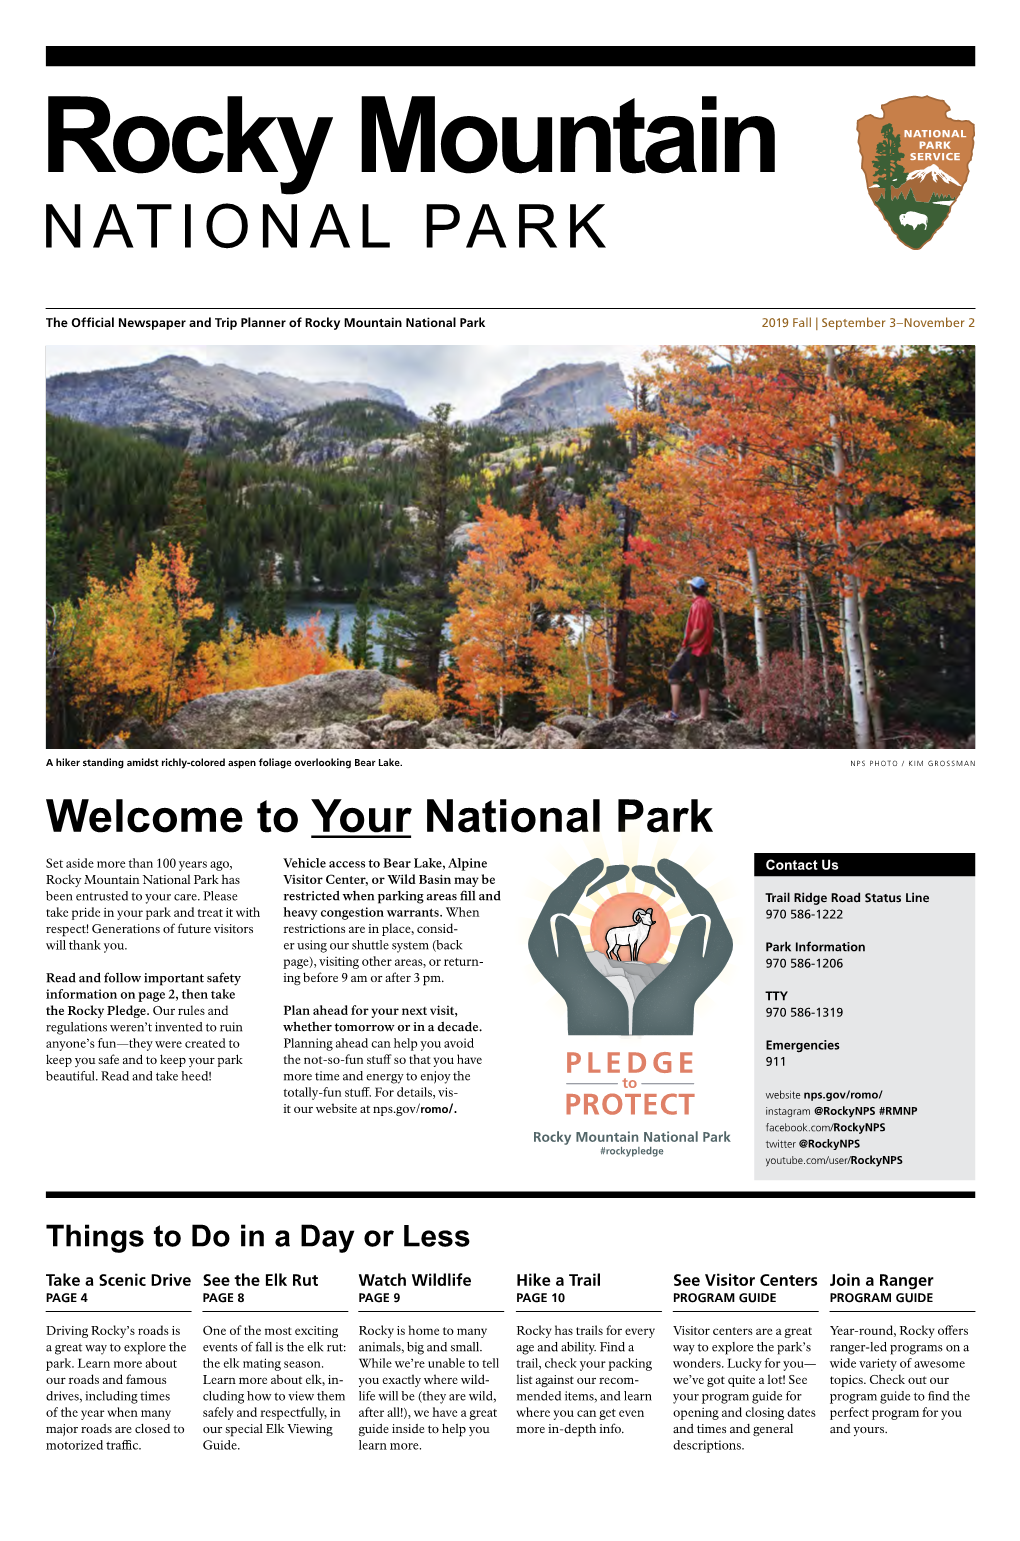 Rocky Mountain National Park Official Newspaper and Trip Planner